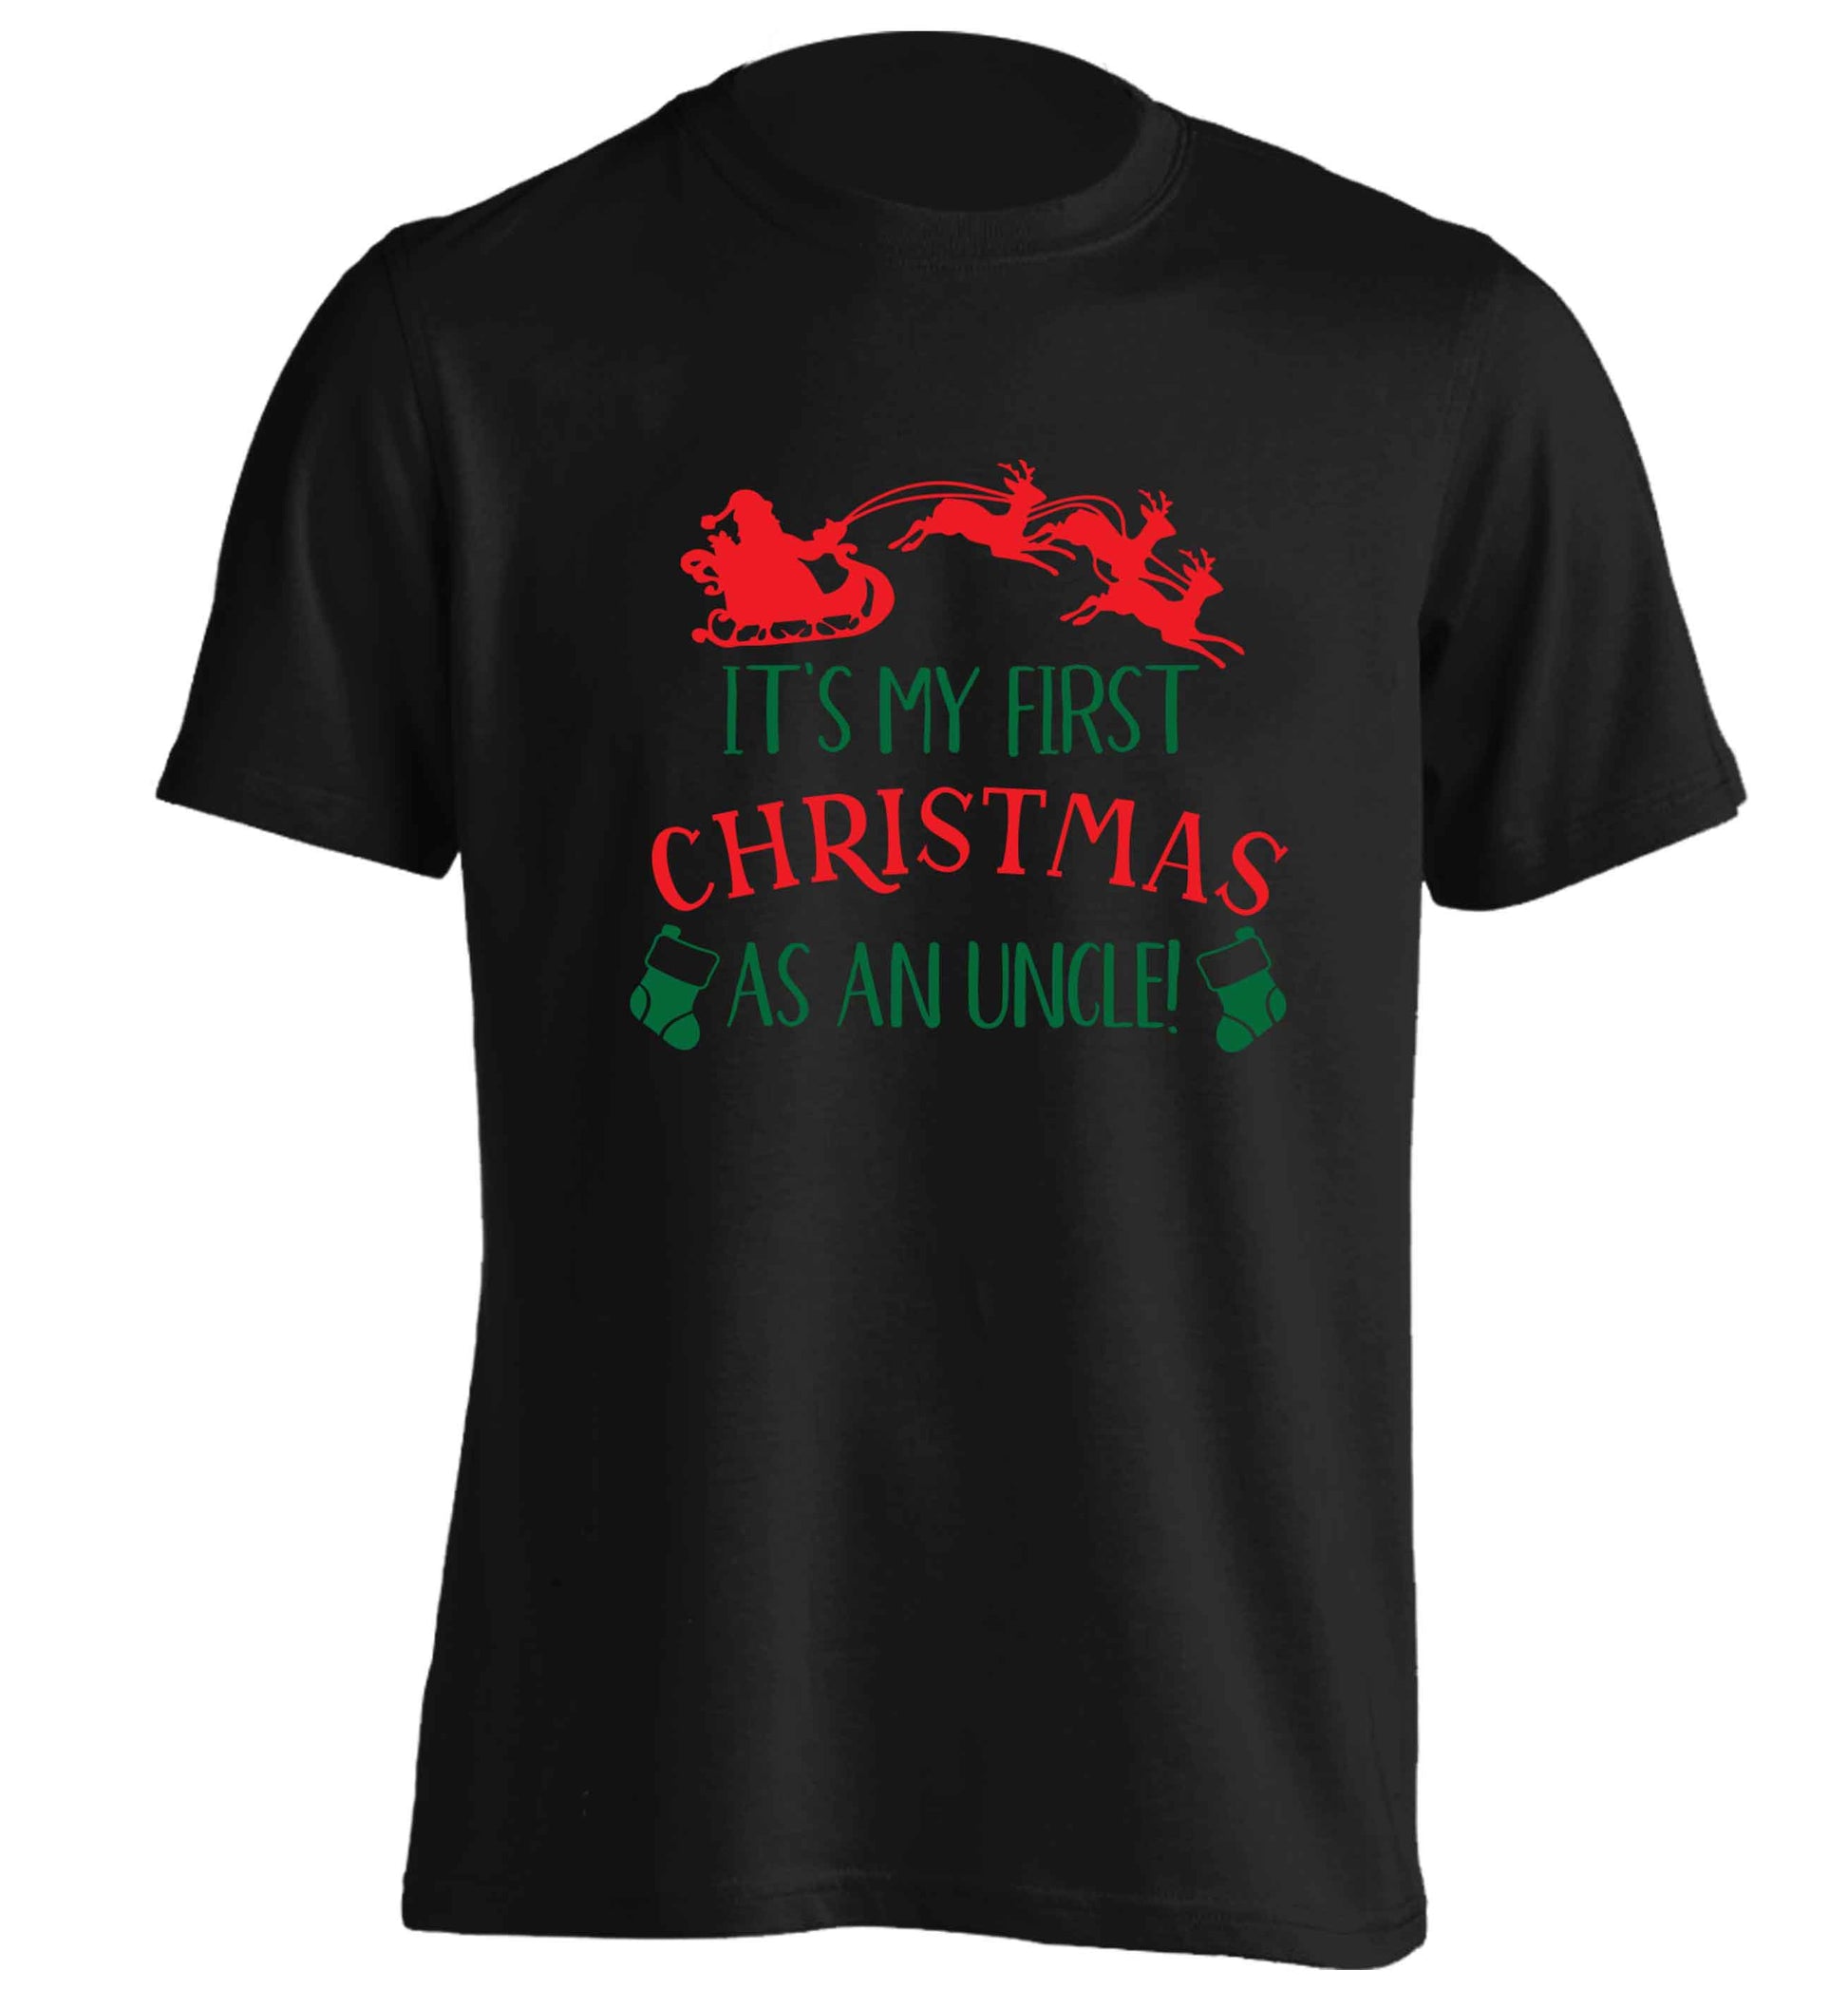 It's my first Christmas as an uncle! adults unisex black Tshirt 2XL